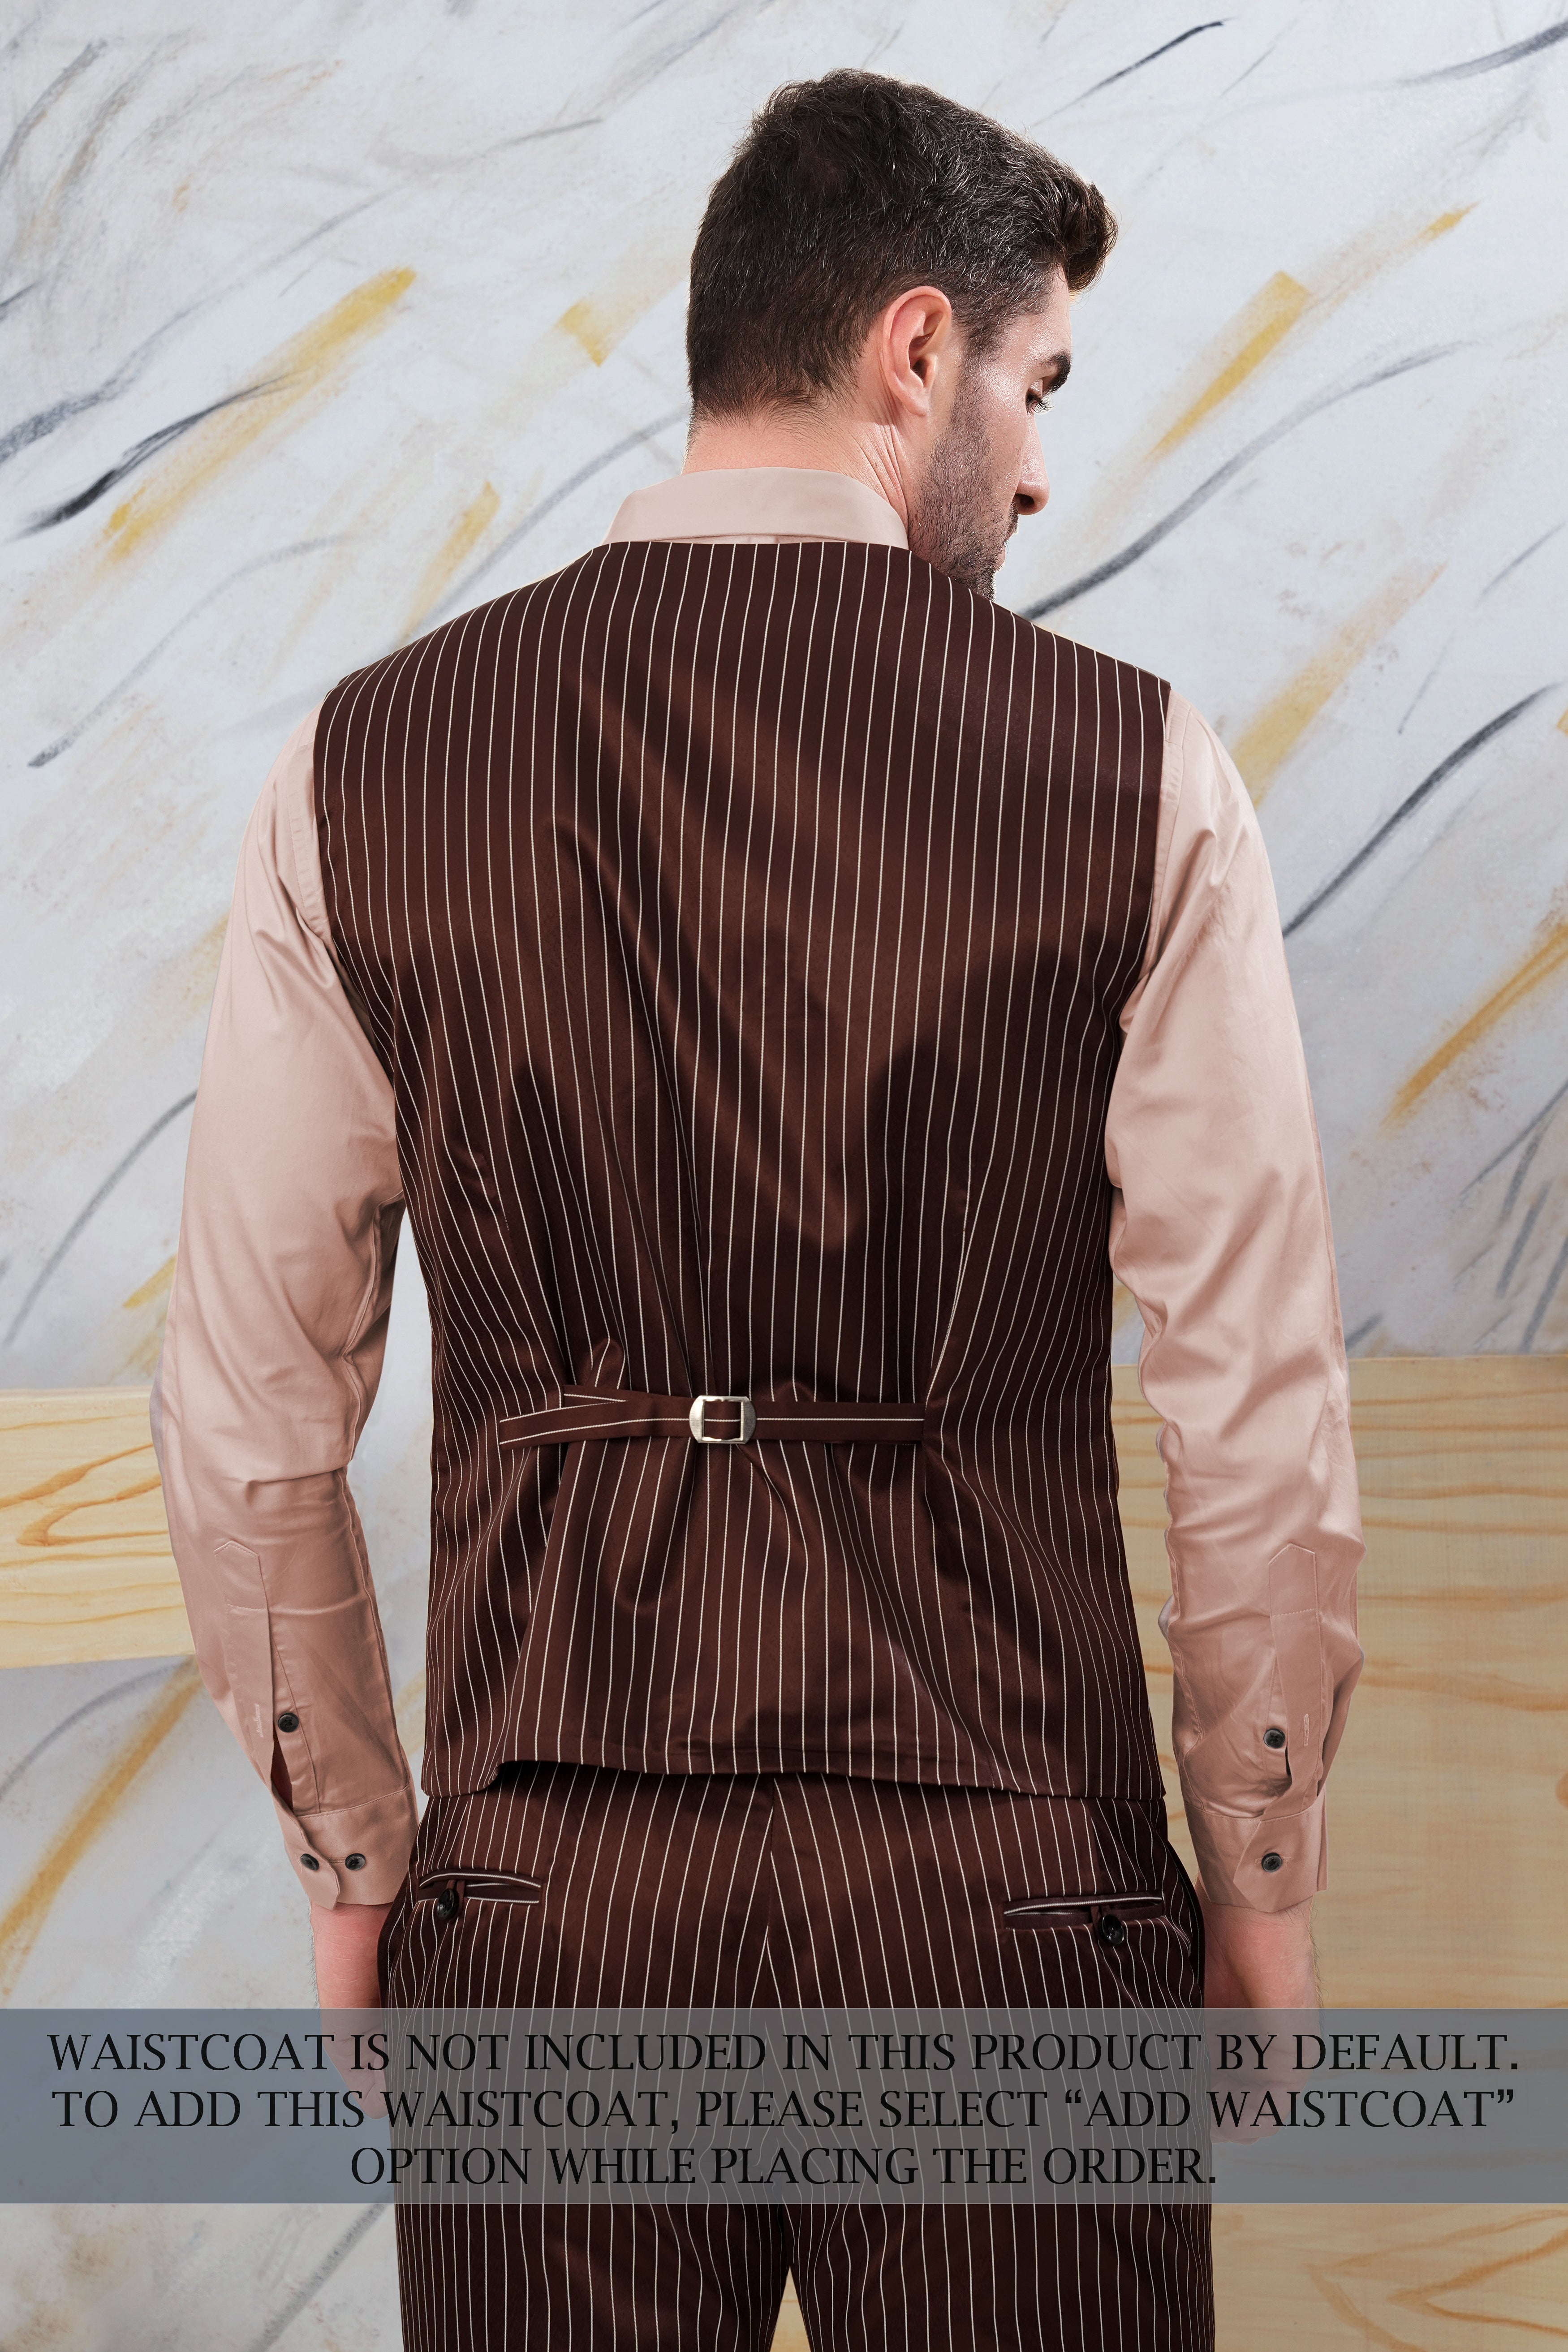 Cork Brown and White Striped Wool Rich Suit ST3083-SB-36, ST3083-SB-38, ST3083-SB-40, ST3083-SB-42, ST3083-SB-44, ST3083-SB-46, ST3083-SB-48, ST3083-SB-50, ST3083-SB-52, ST3083-SB-54, ST3083-SB-56, ST3083-SB-58, ST3083-SB-60